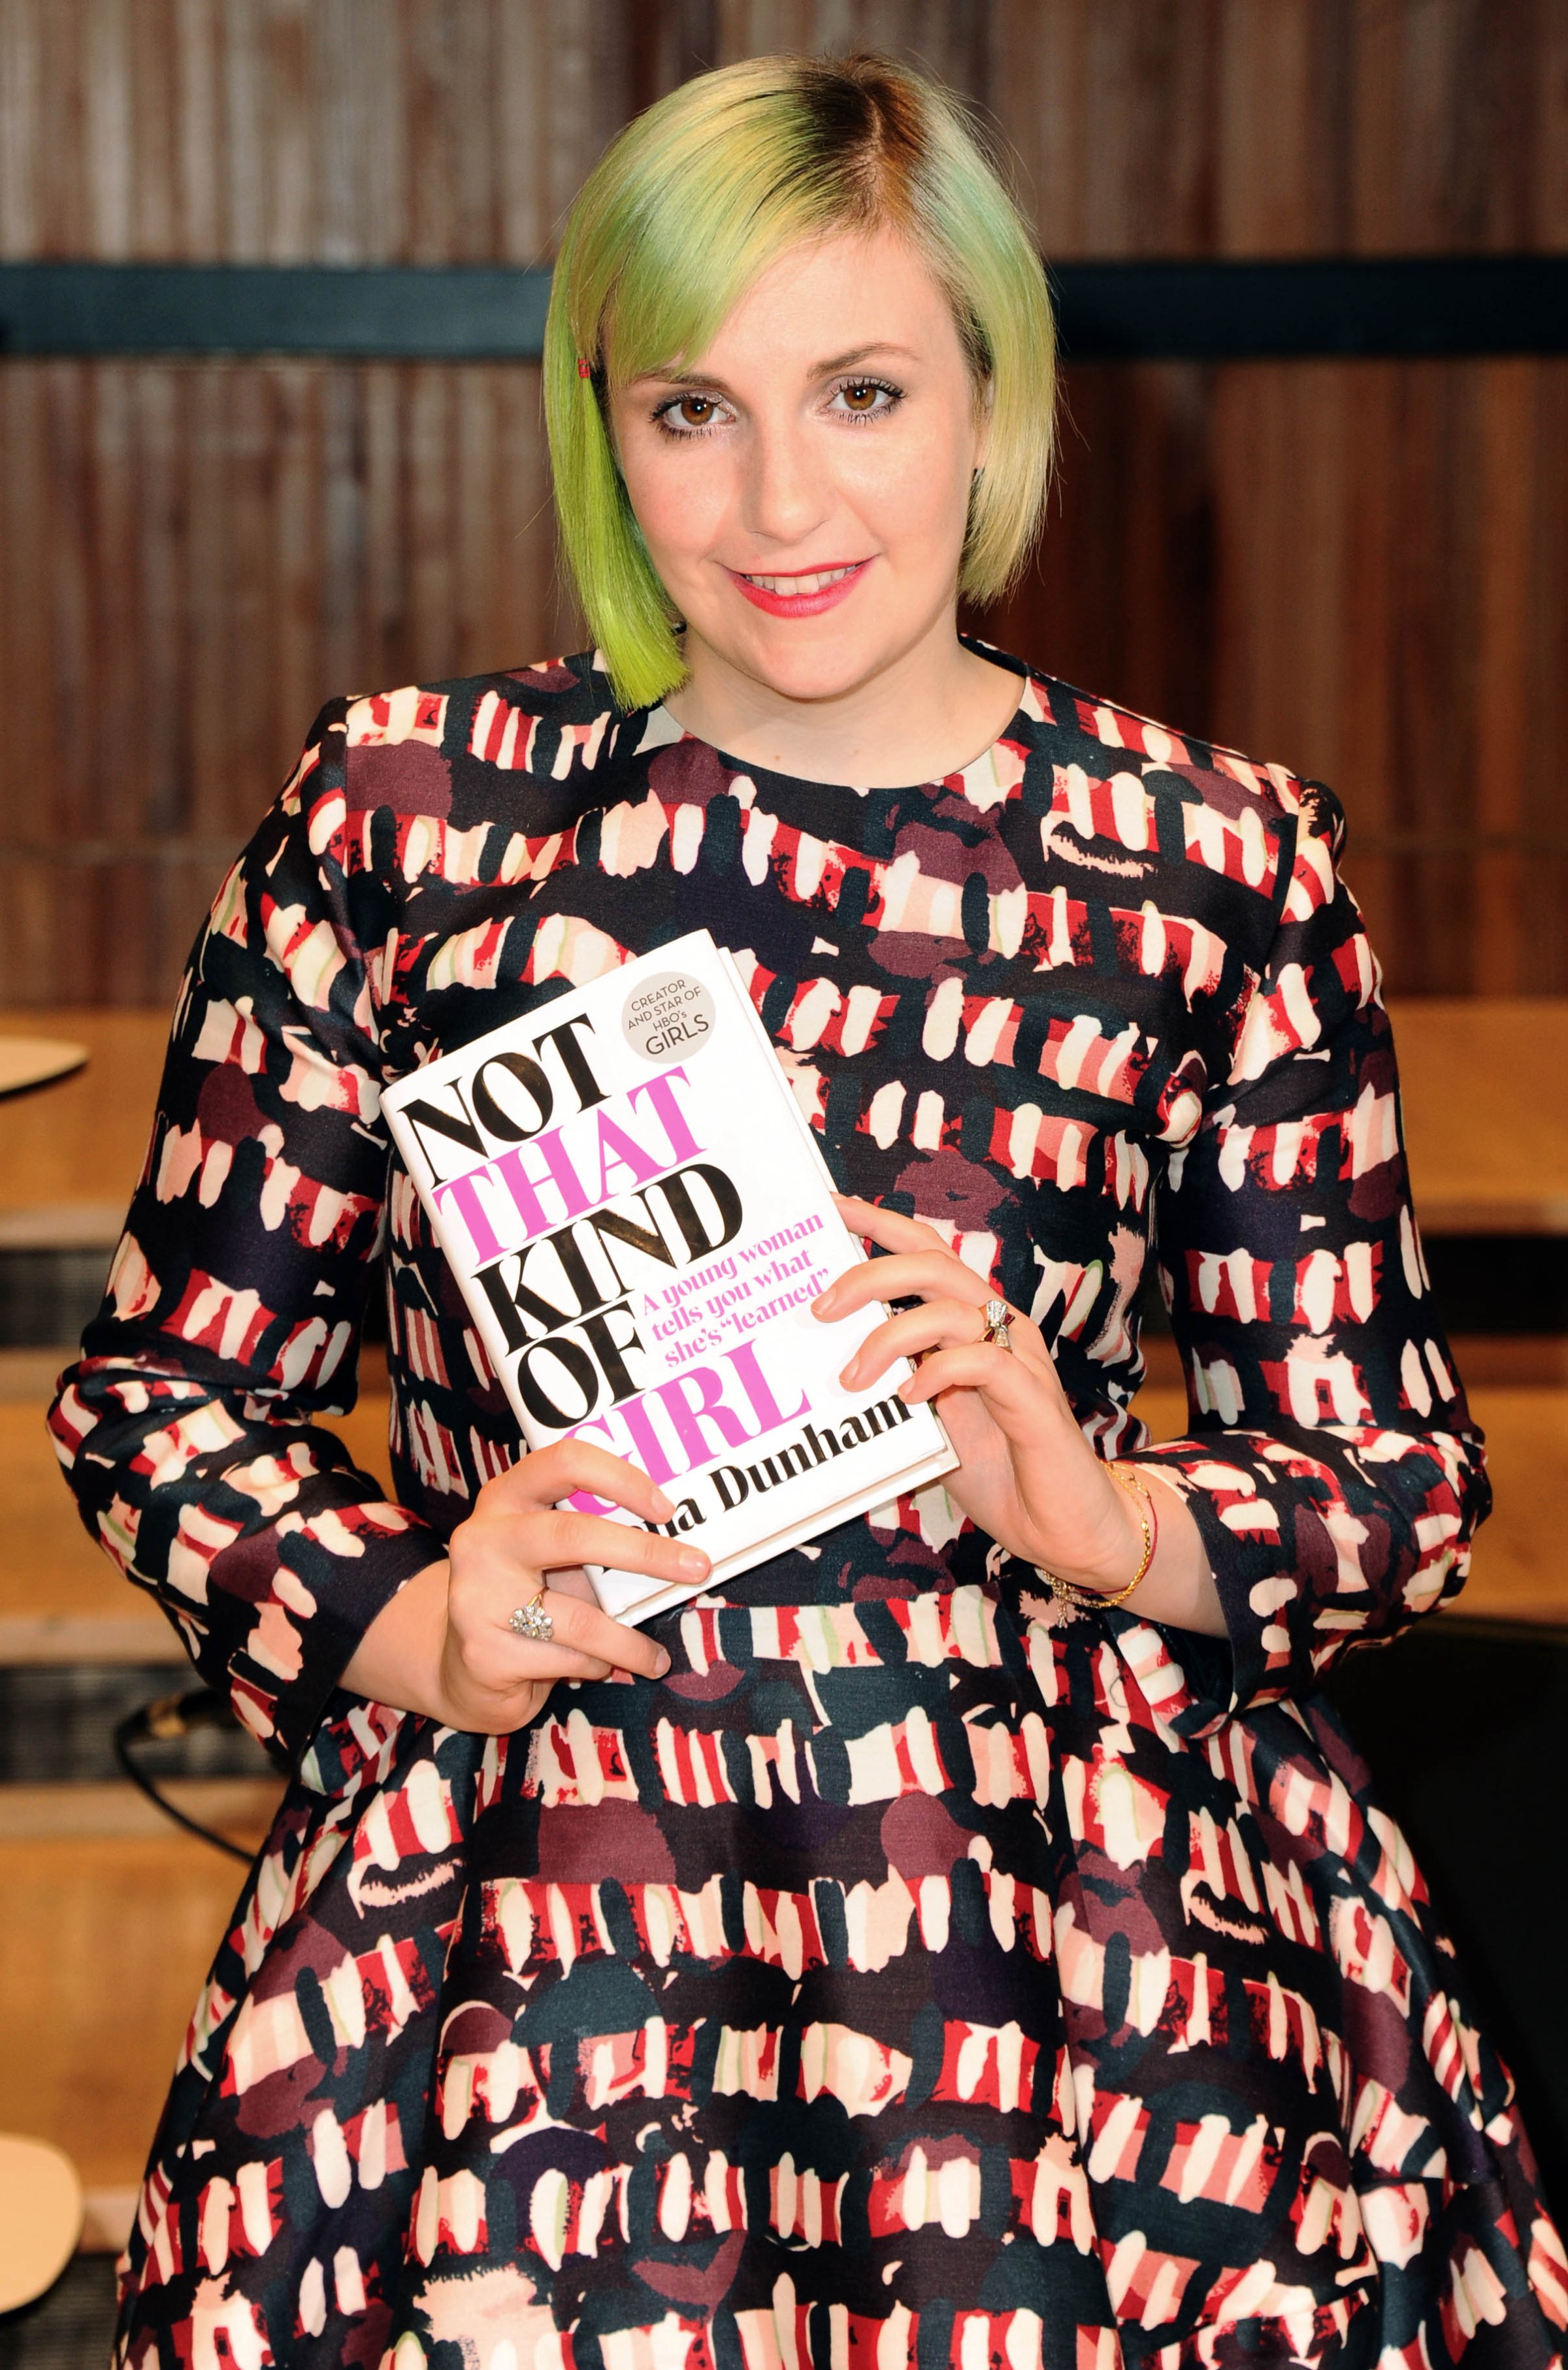 Lena Dunham at her book launch for 'Not That Kind Of Girl' on Oct. 31, 2014 in London, England.